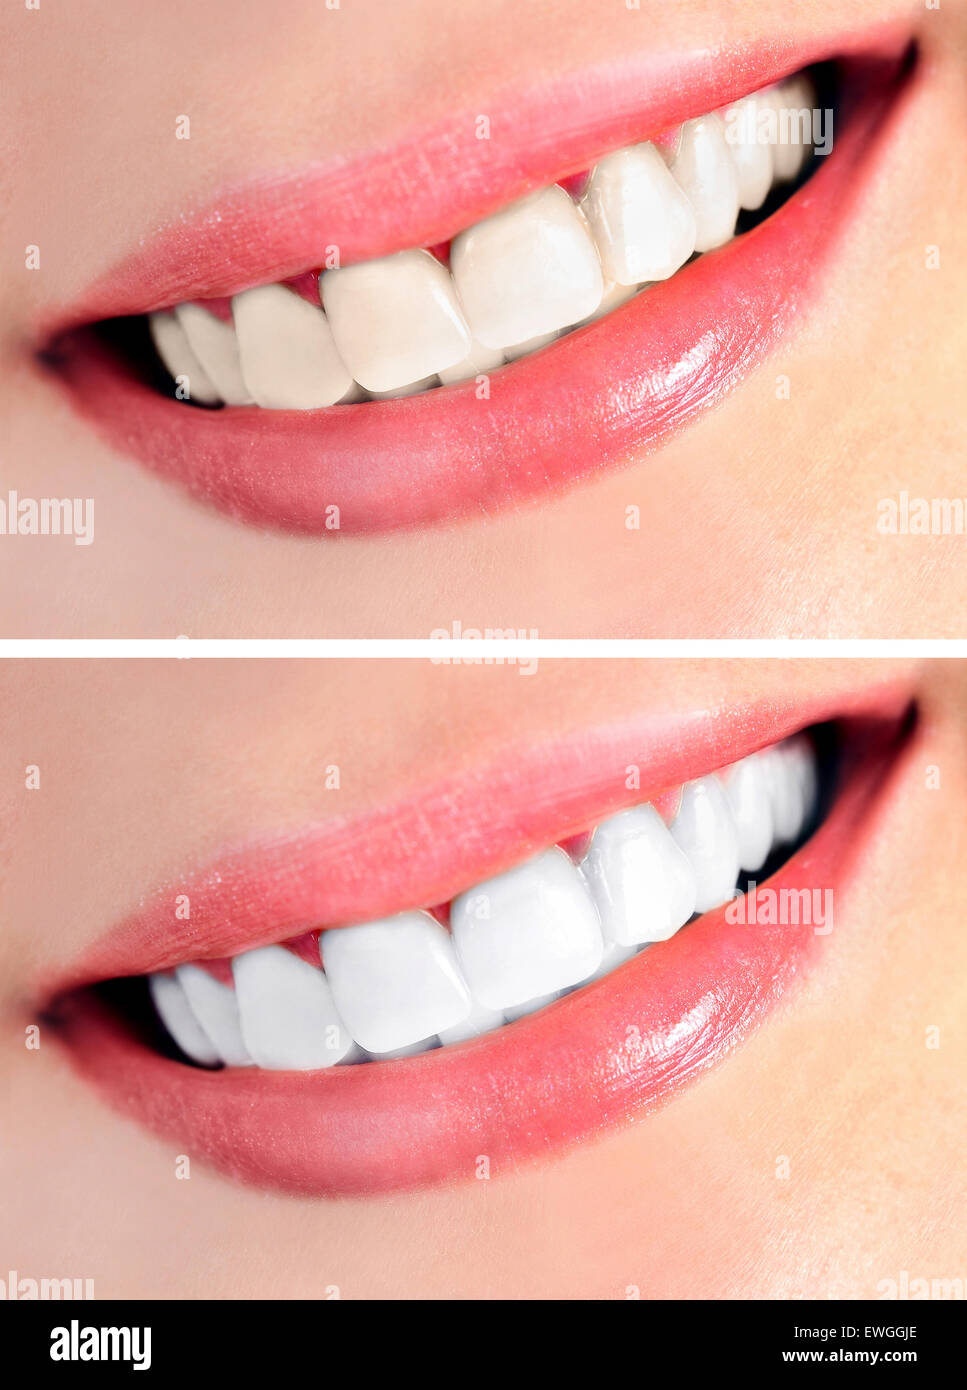 Healthy teeth and smile Stock Photo